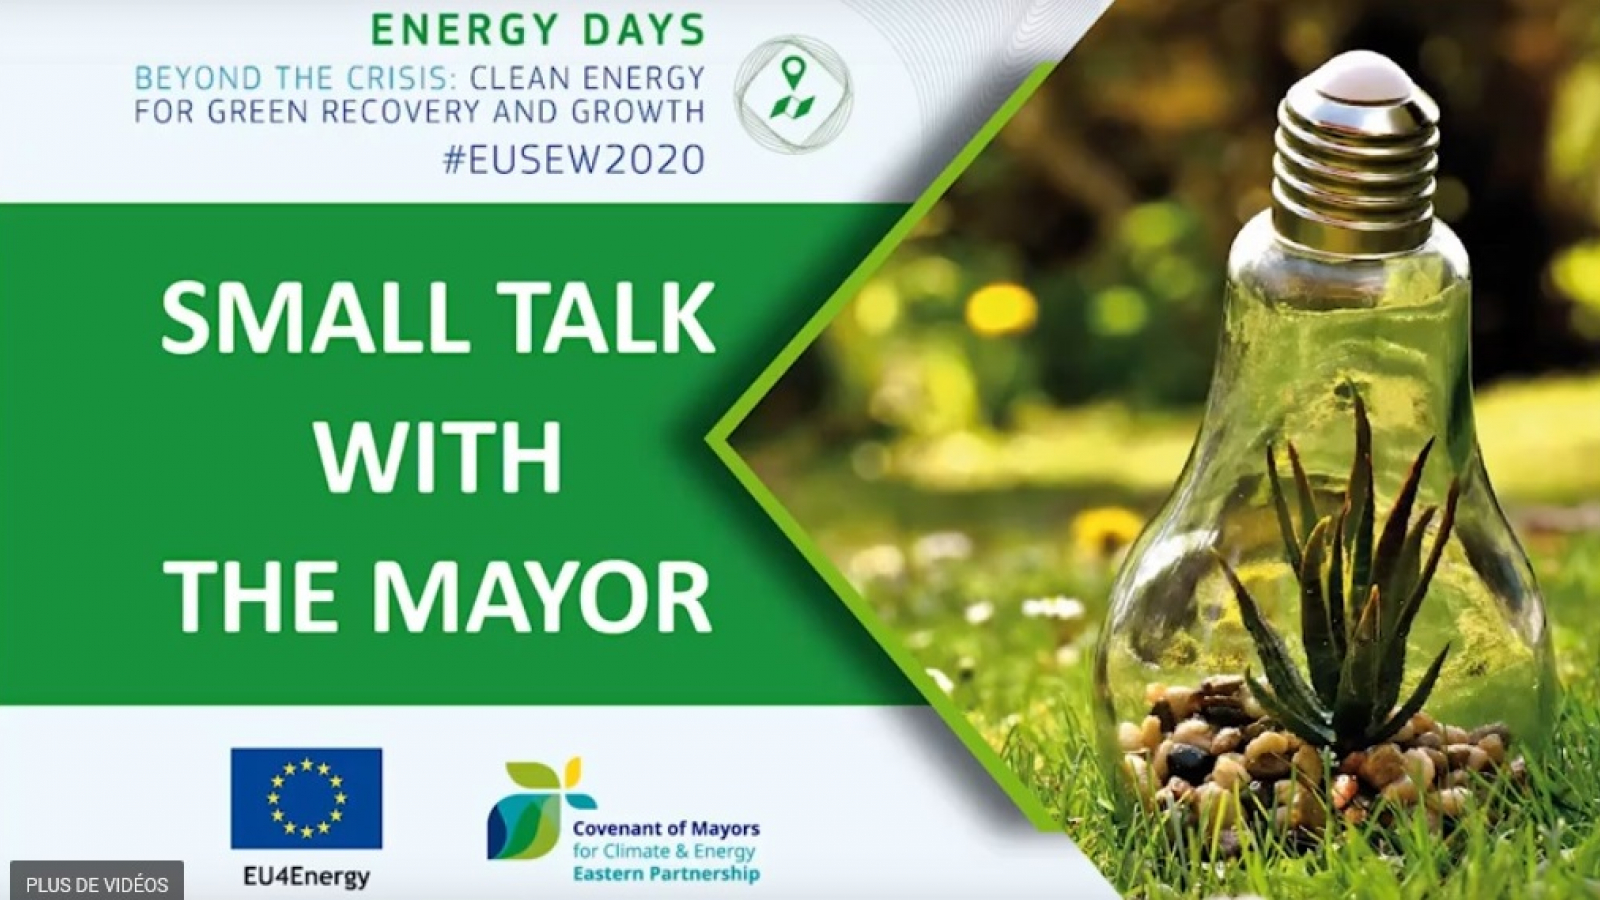 Covenant of Mayors East organises sessions on best practices for energy transition after COVID-19